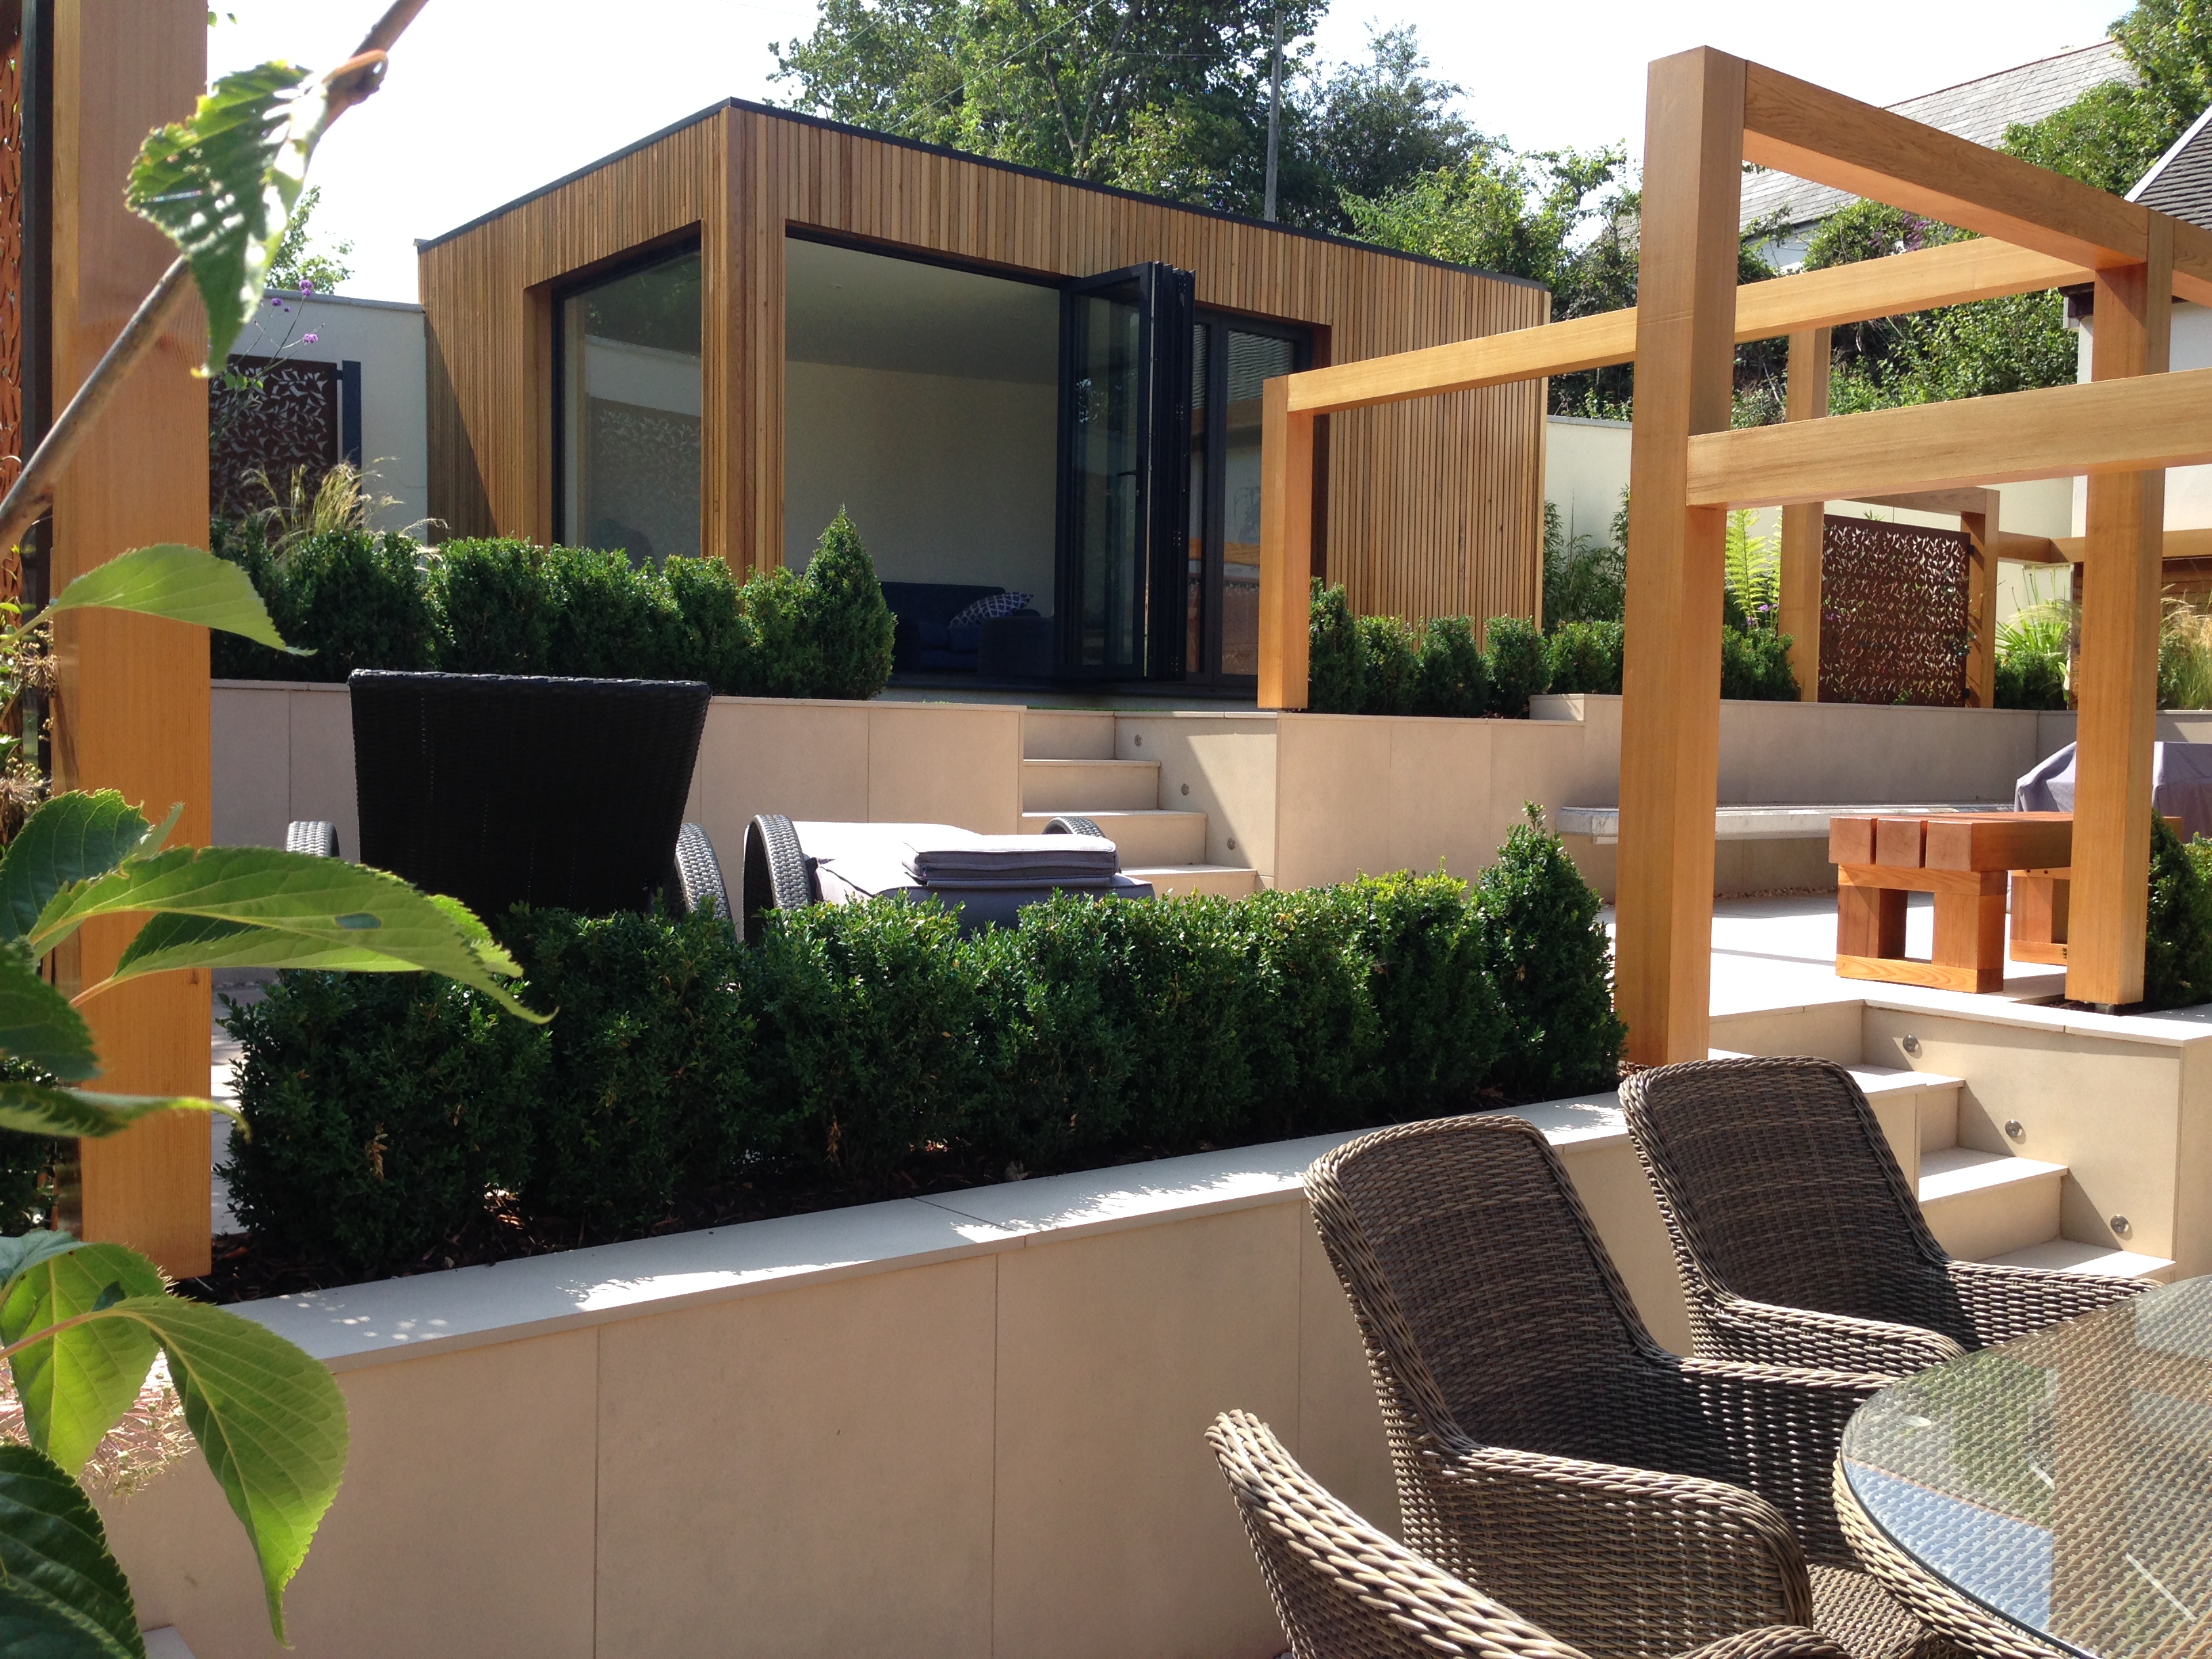 view into the contemporary garden with seating pergola features and summerhouse